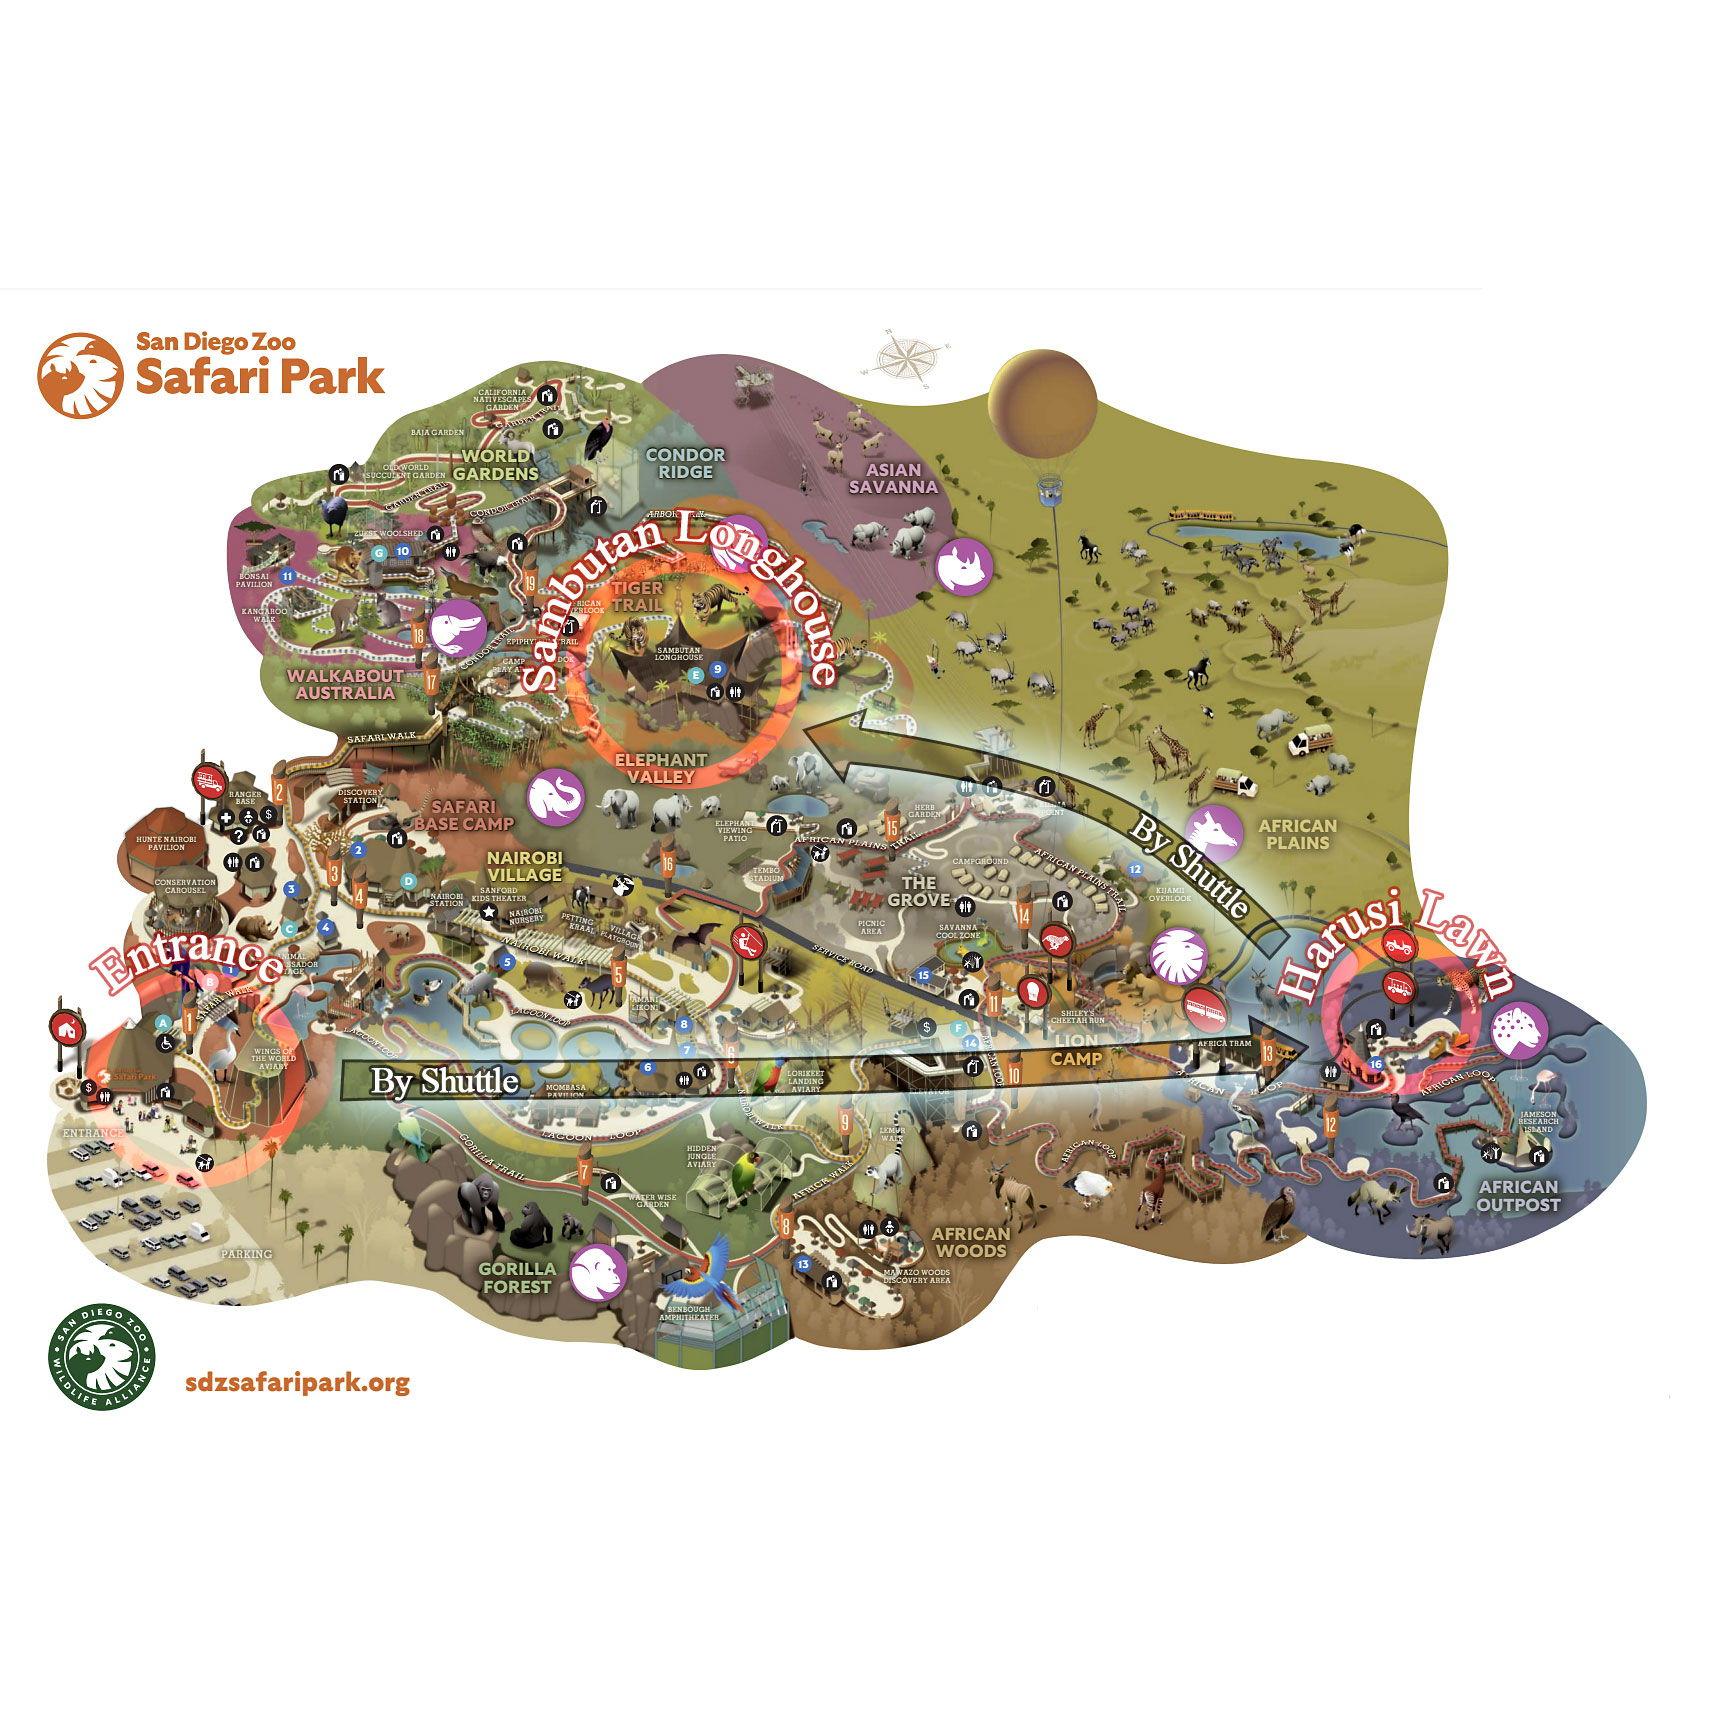 Official park map, with wedding locations marked